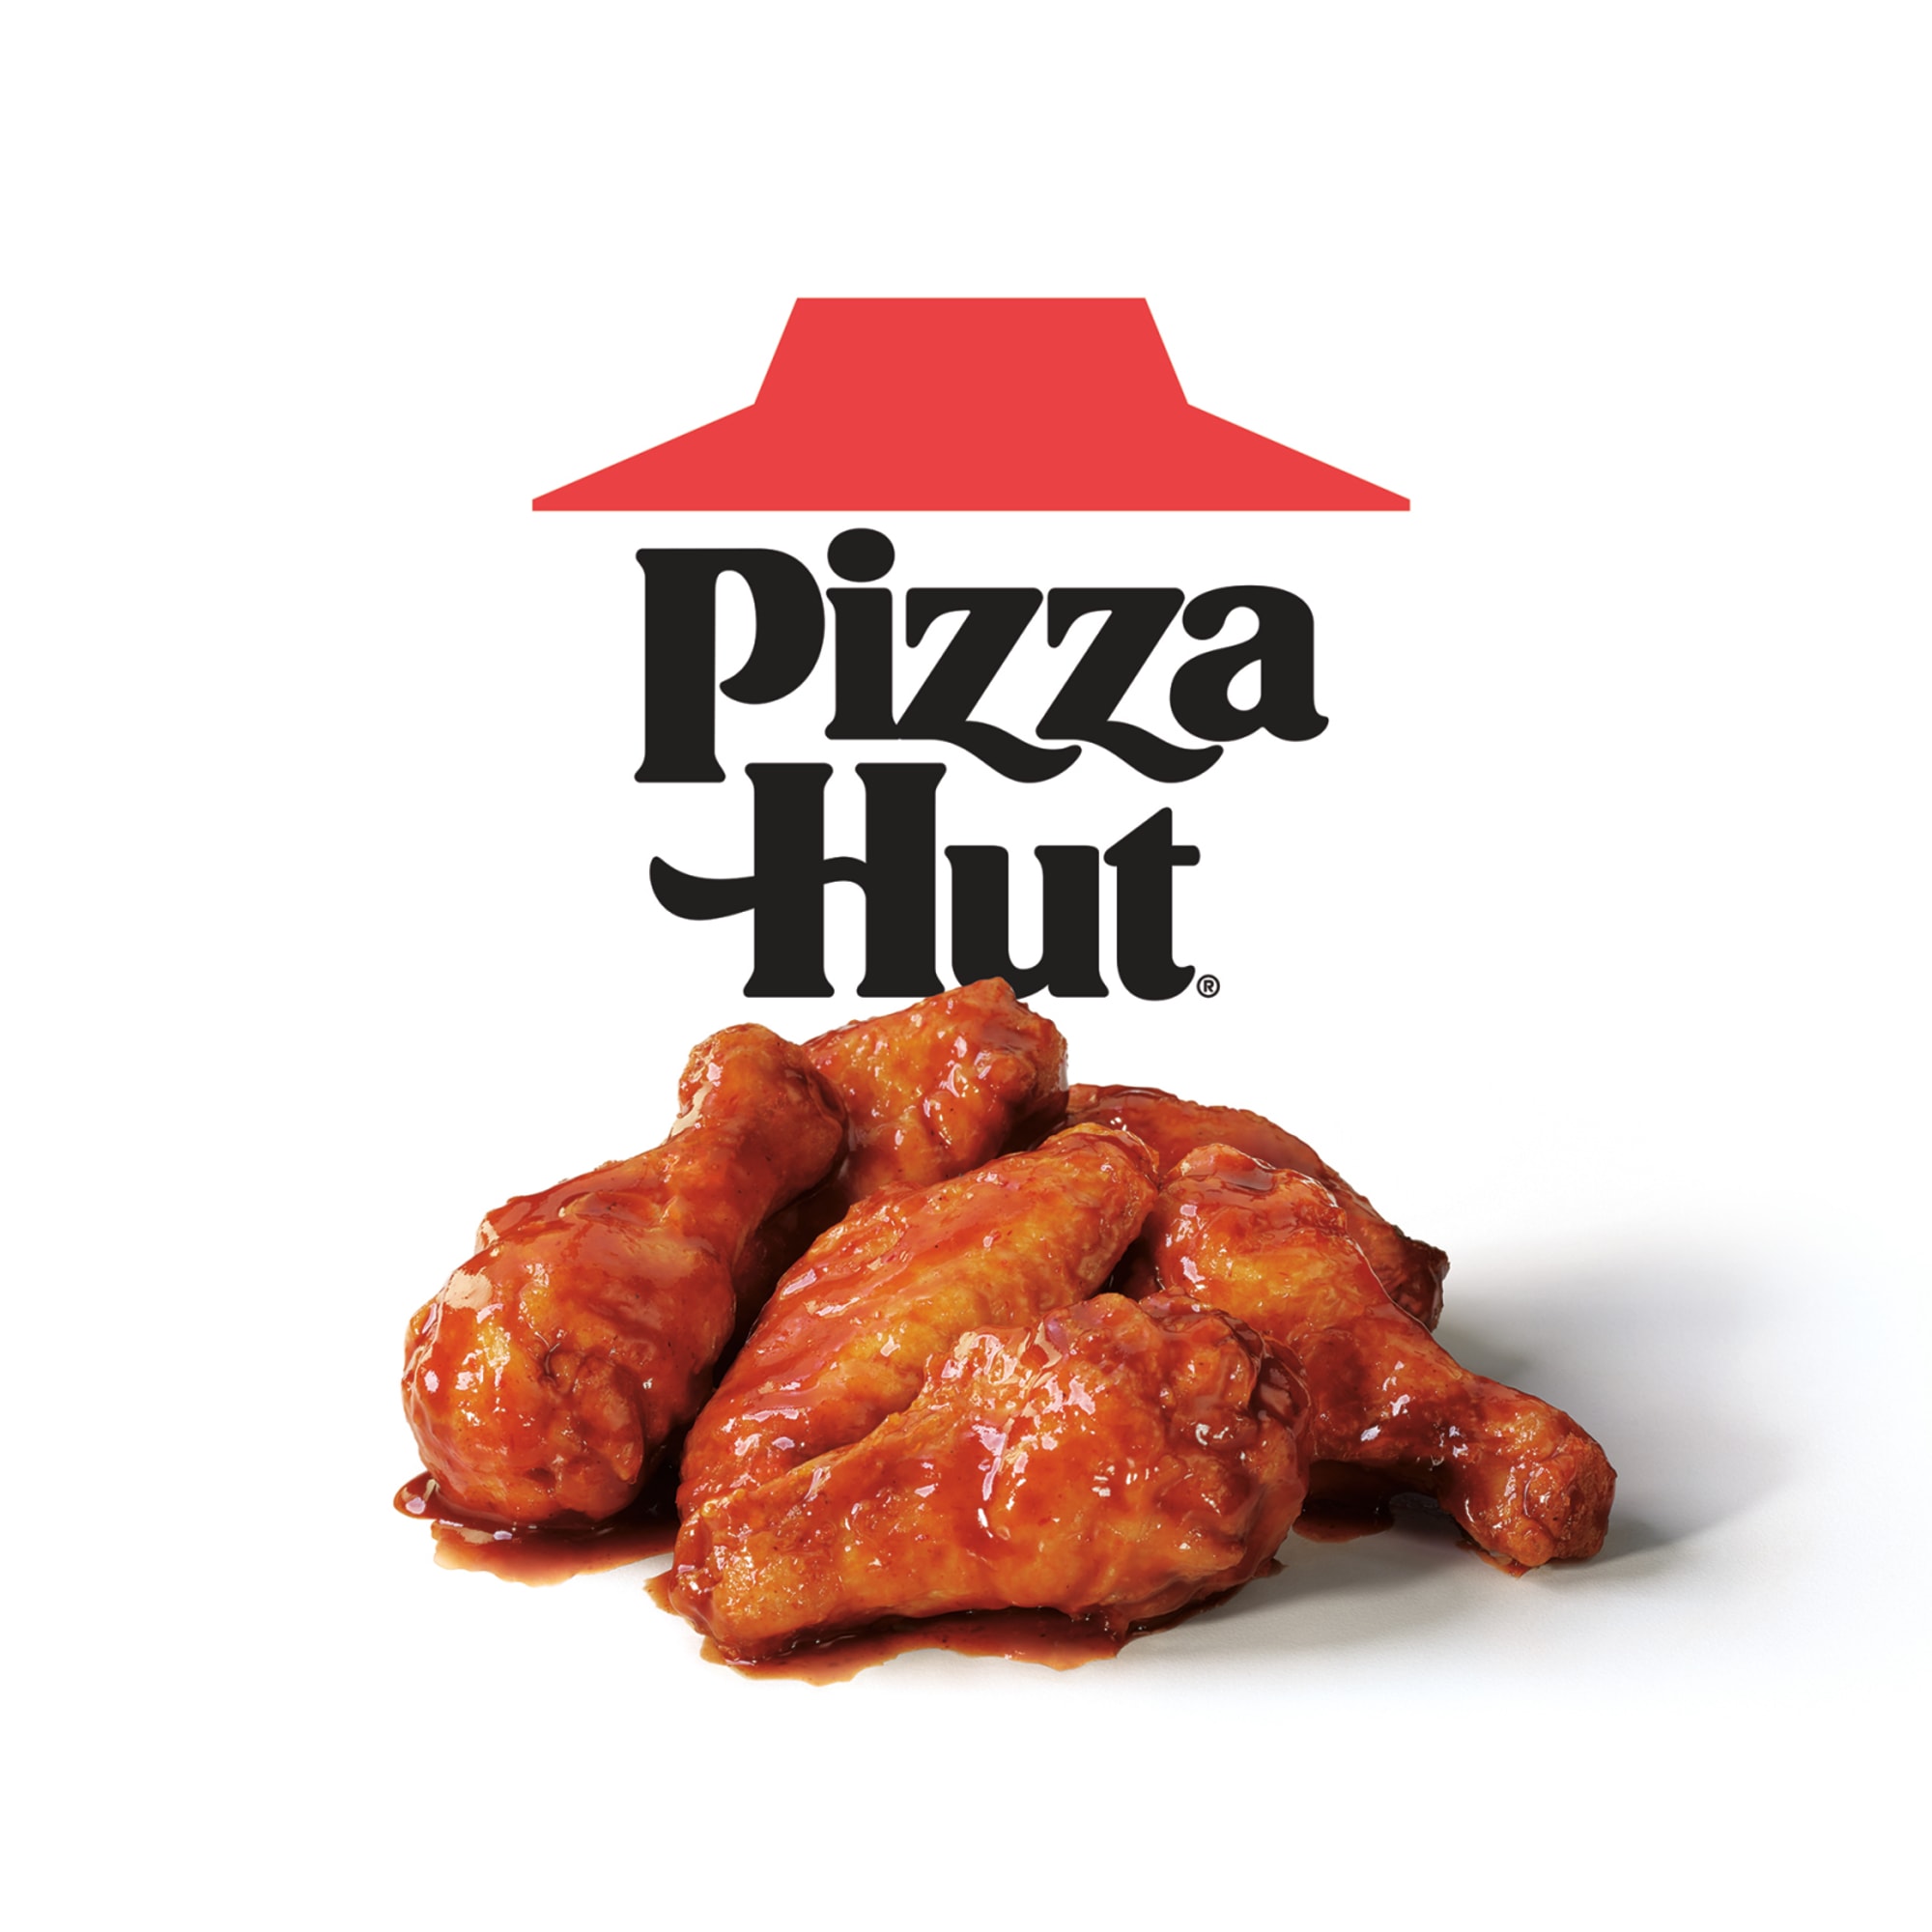 Pizza Hut adds a 10th signature flavor of hot wings to the menu and we